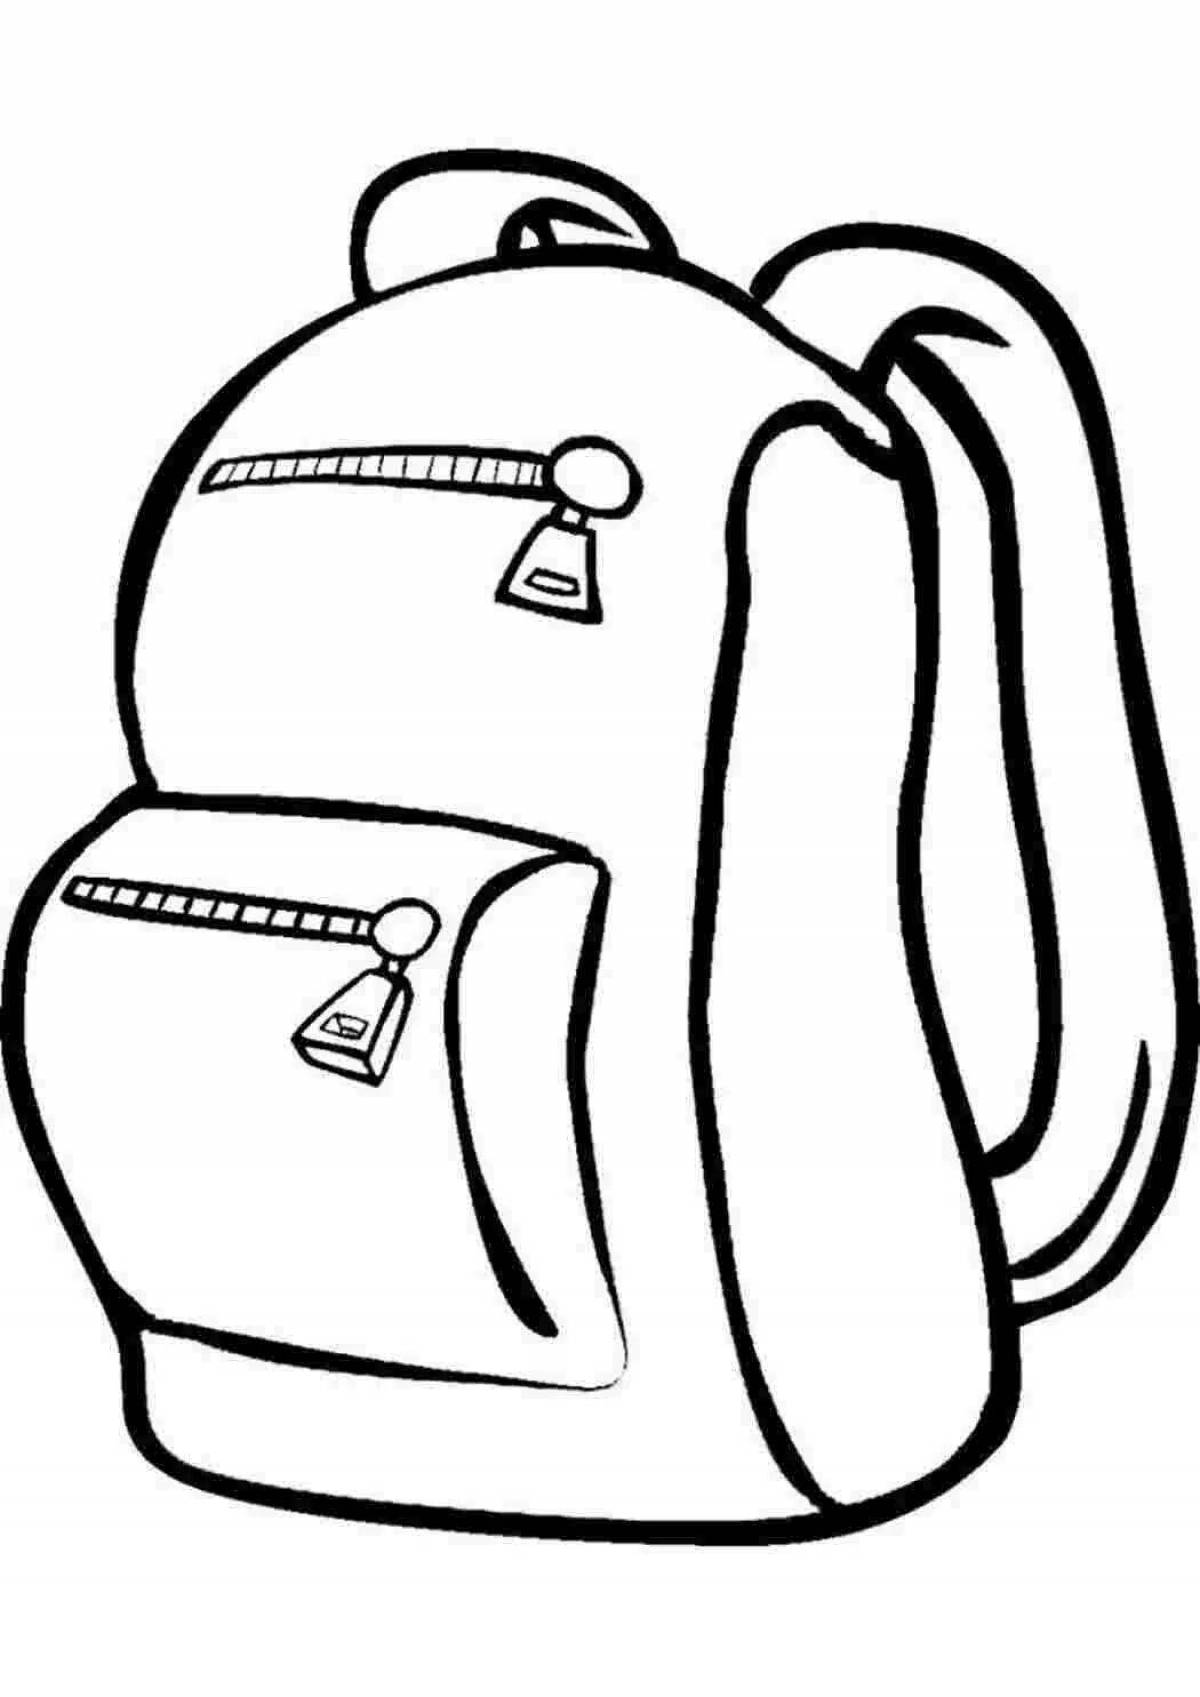 Fun backpack coloring book for kids